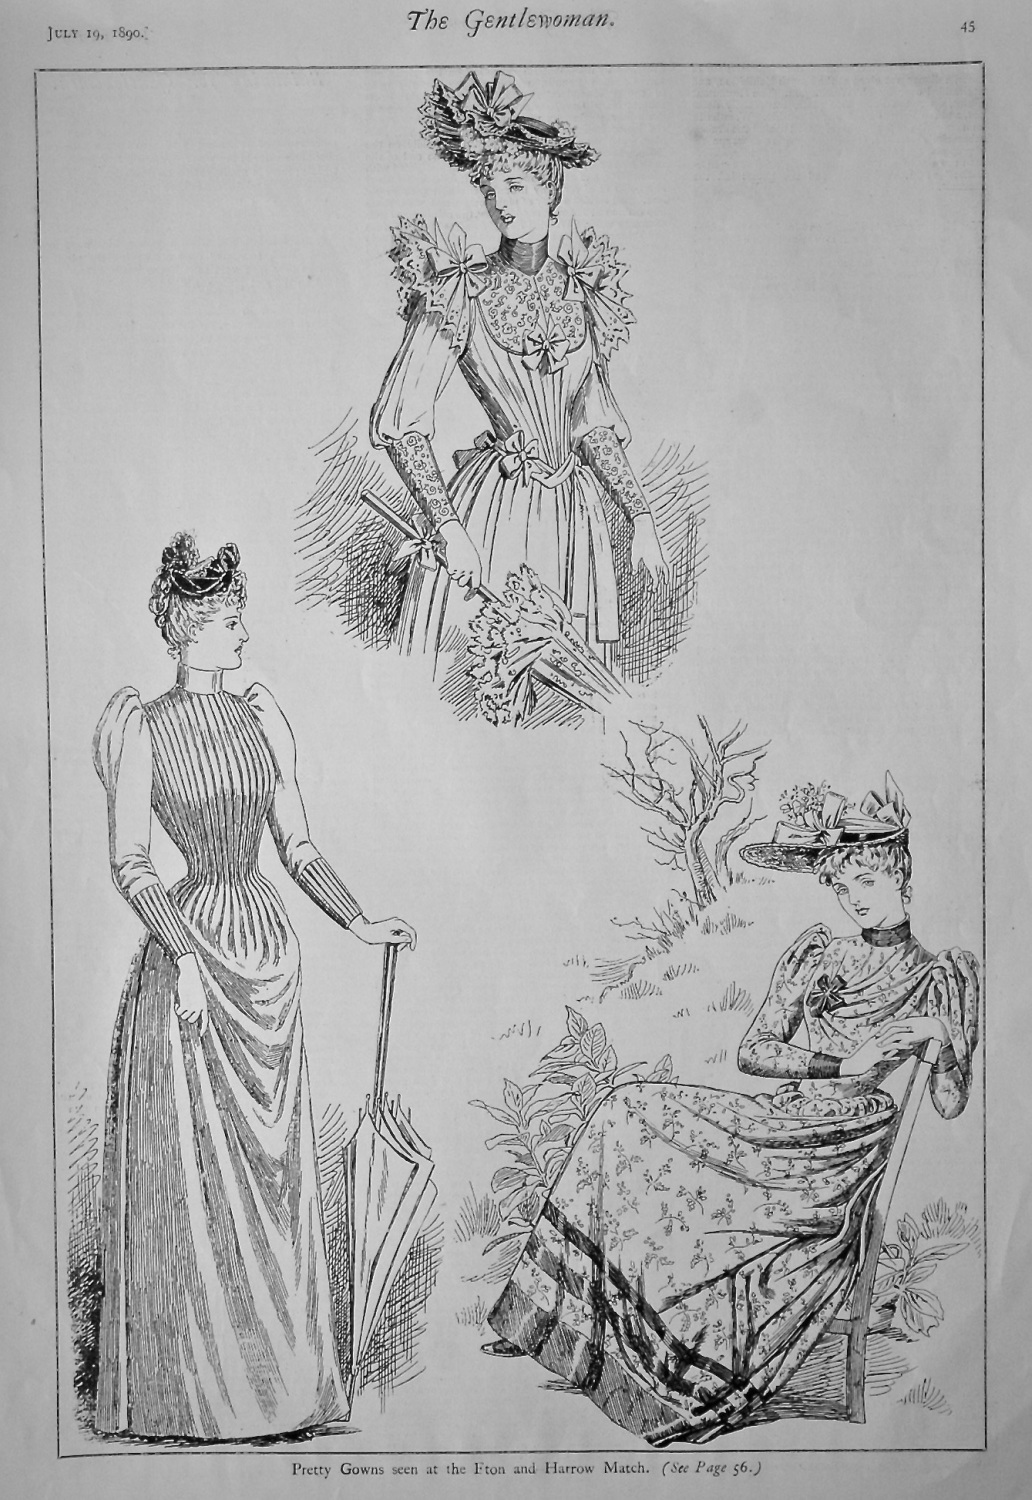 Pretty Gowns seen at the Eton and Harrow Match.  1890.